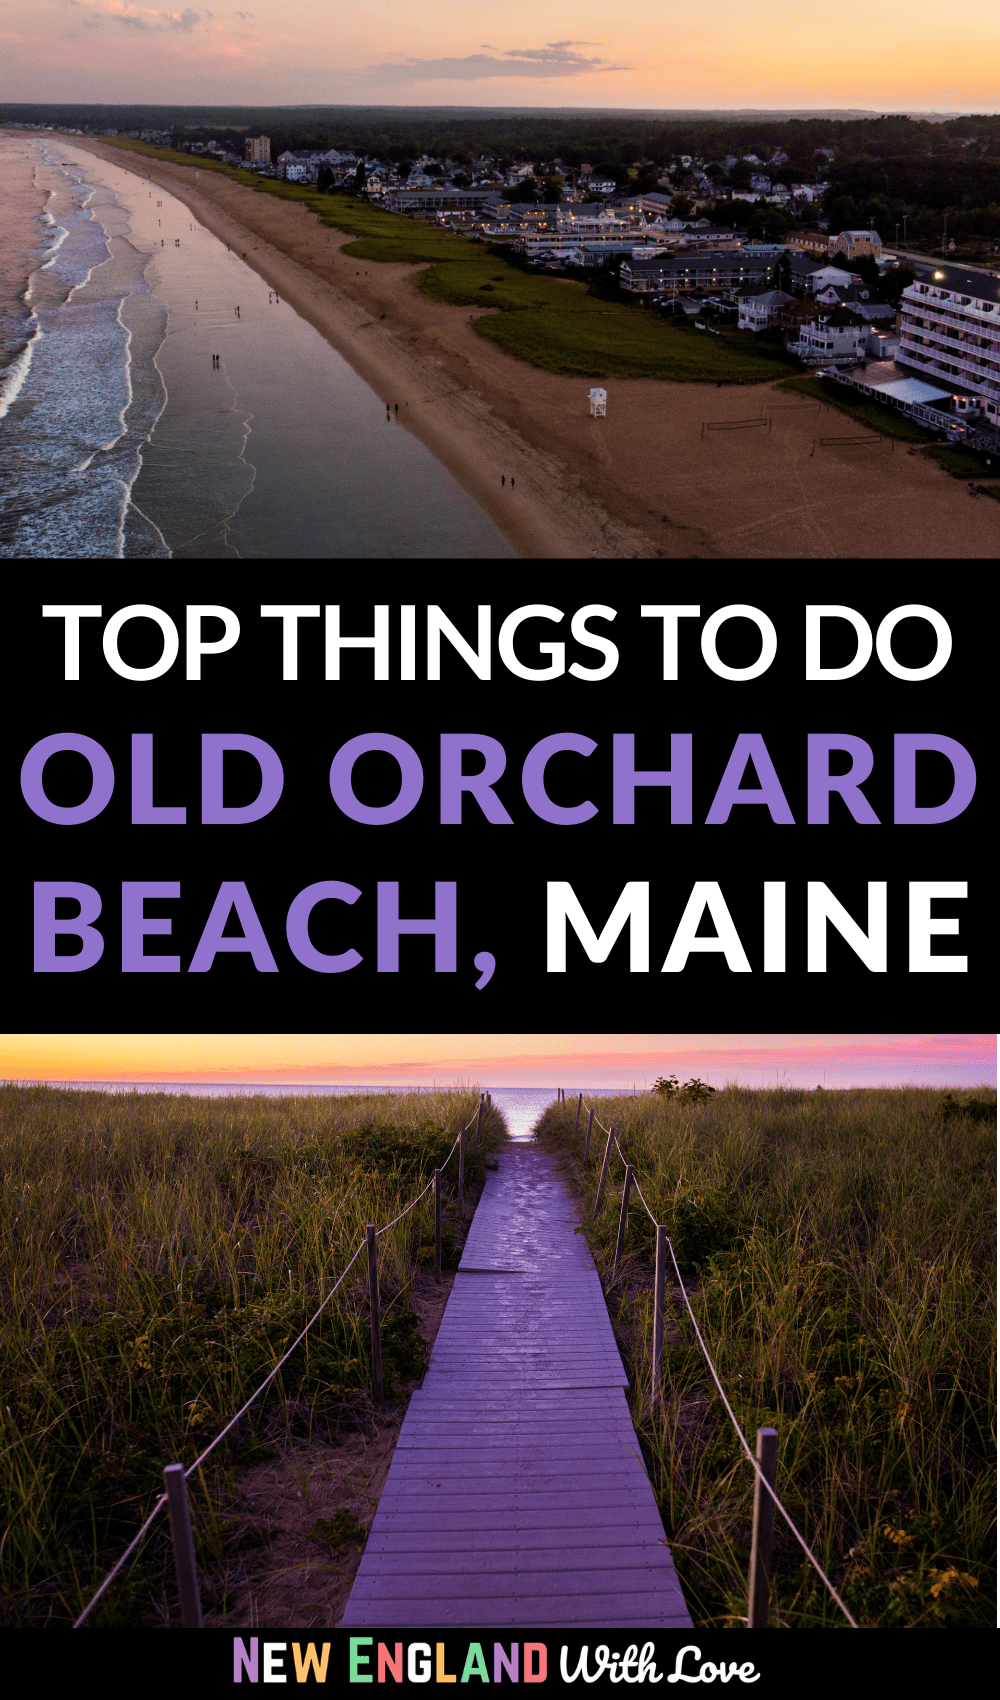 Pinterest graphic reading "TOP THINGS TO DO OLD ORCHARD BEACH, MAINE"